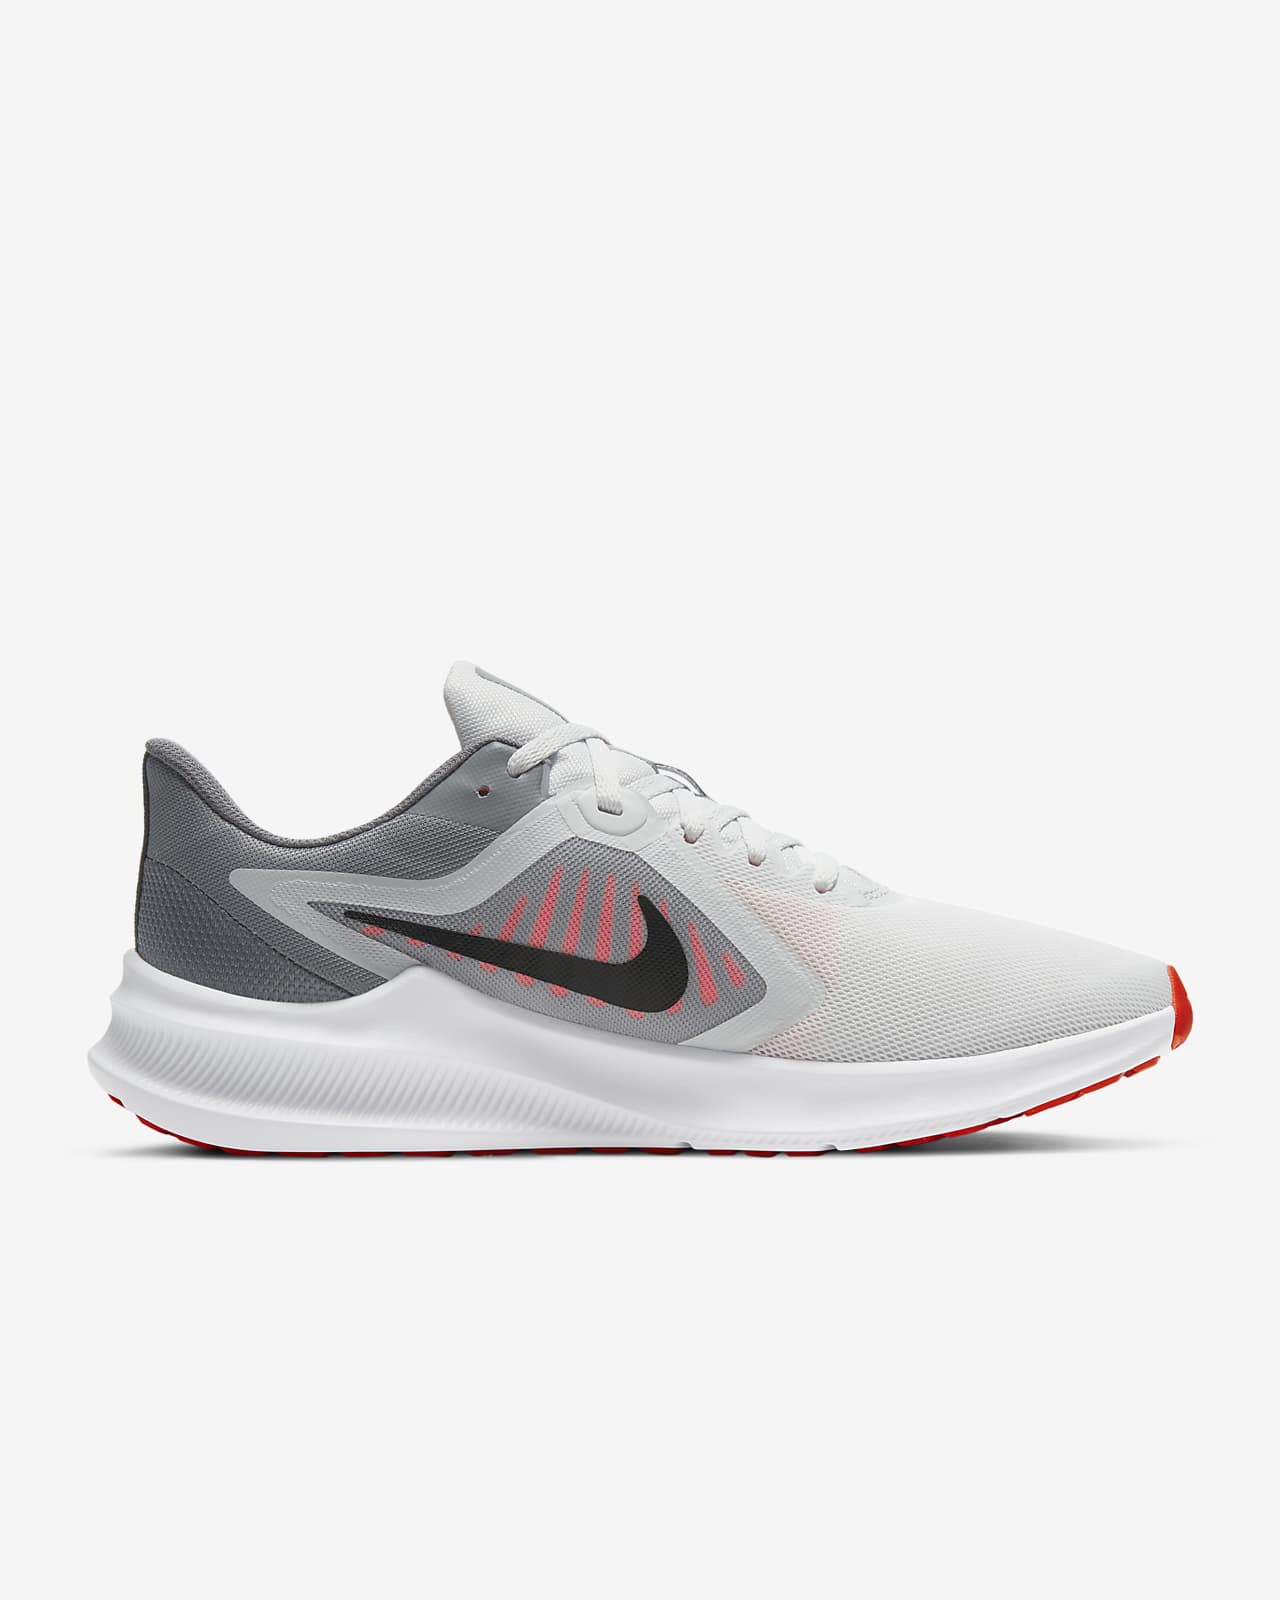 nike shoes photo and price